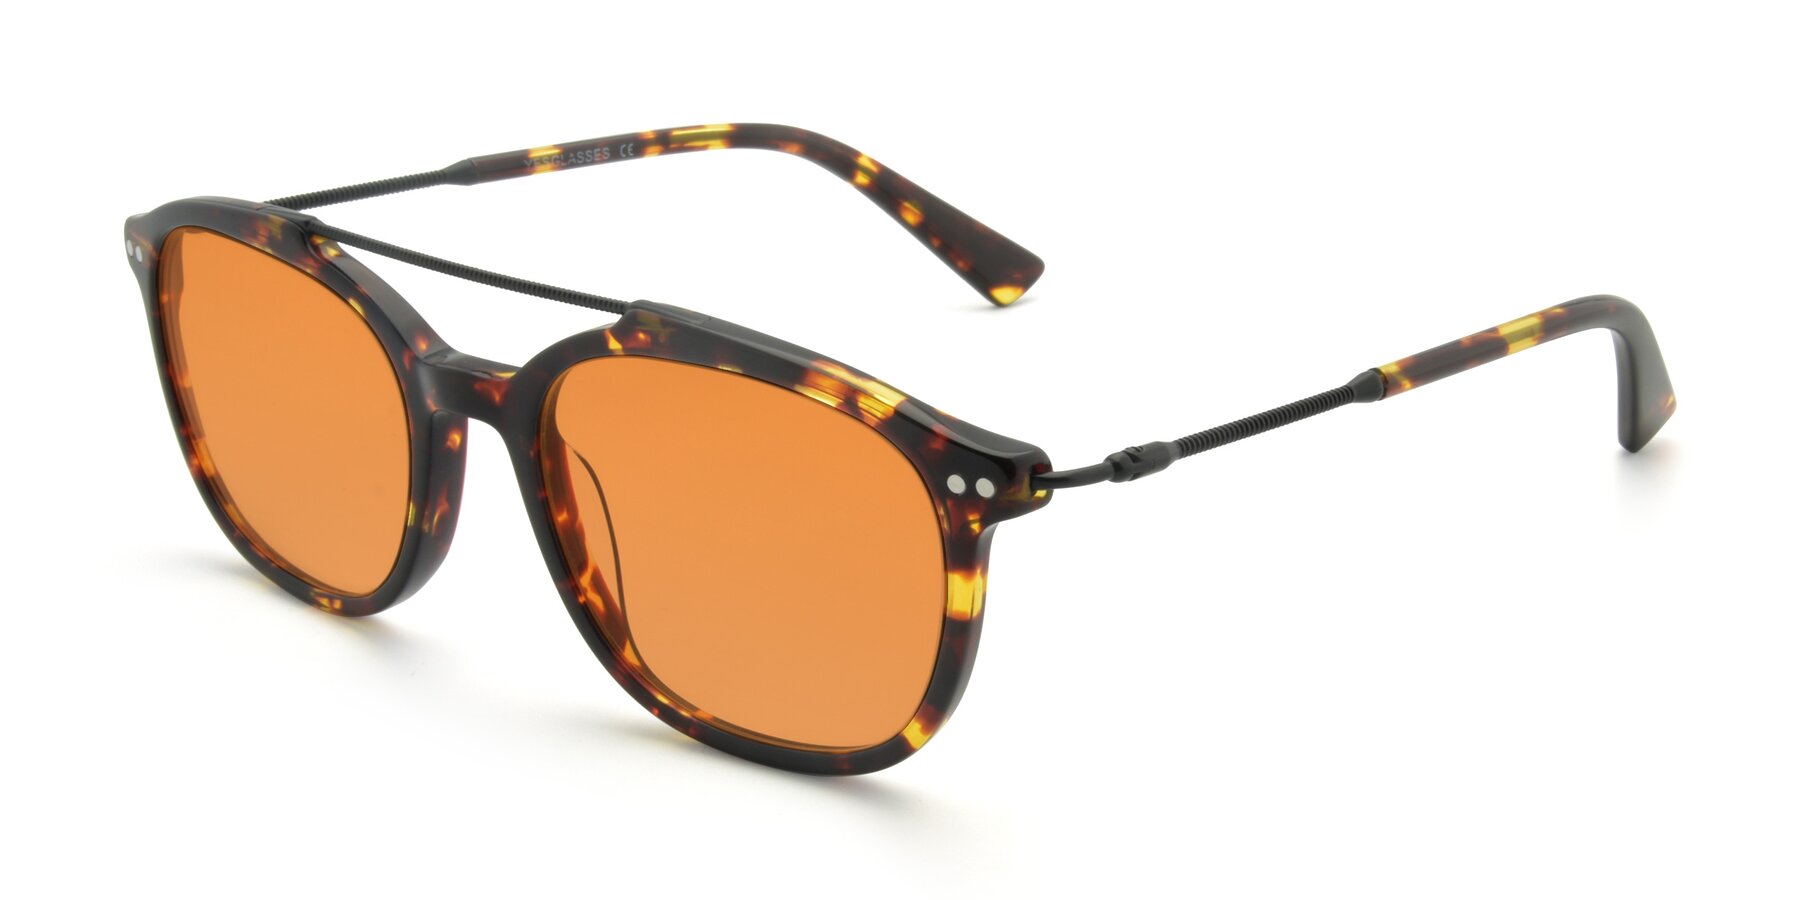 Angle of 17150 in Tortoise Brown with Orange Tinted Lenses